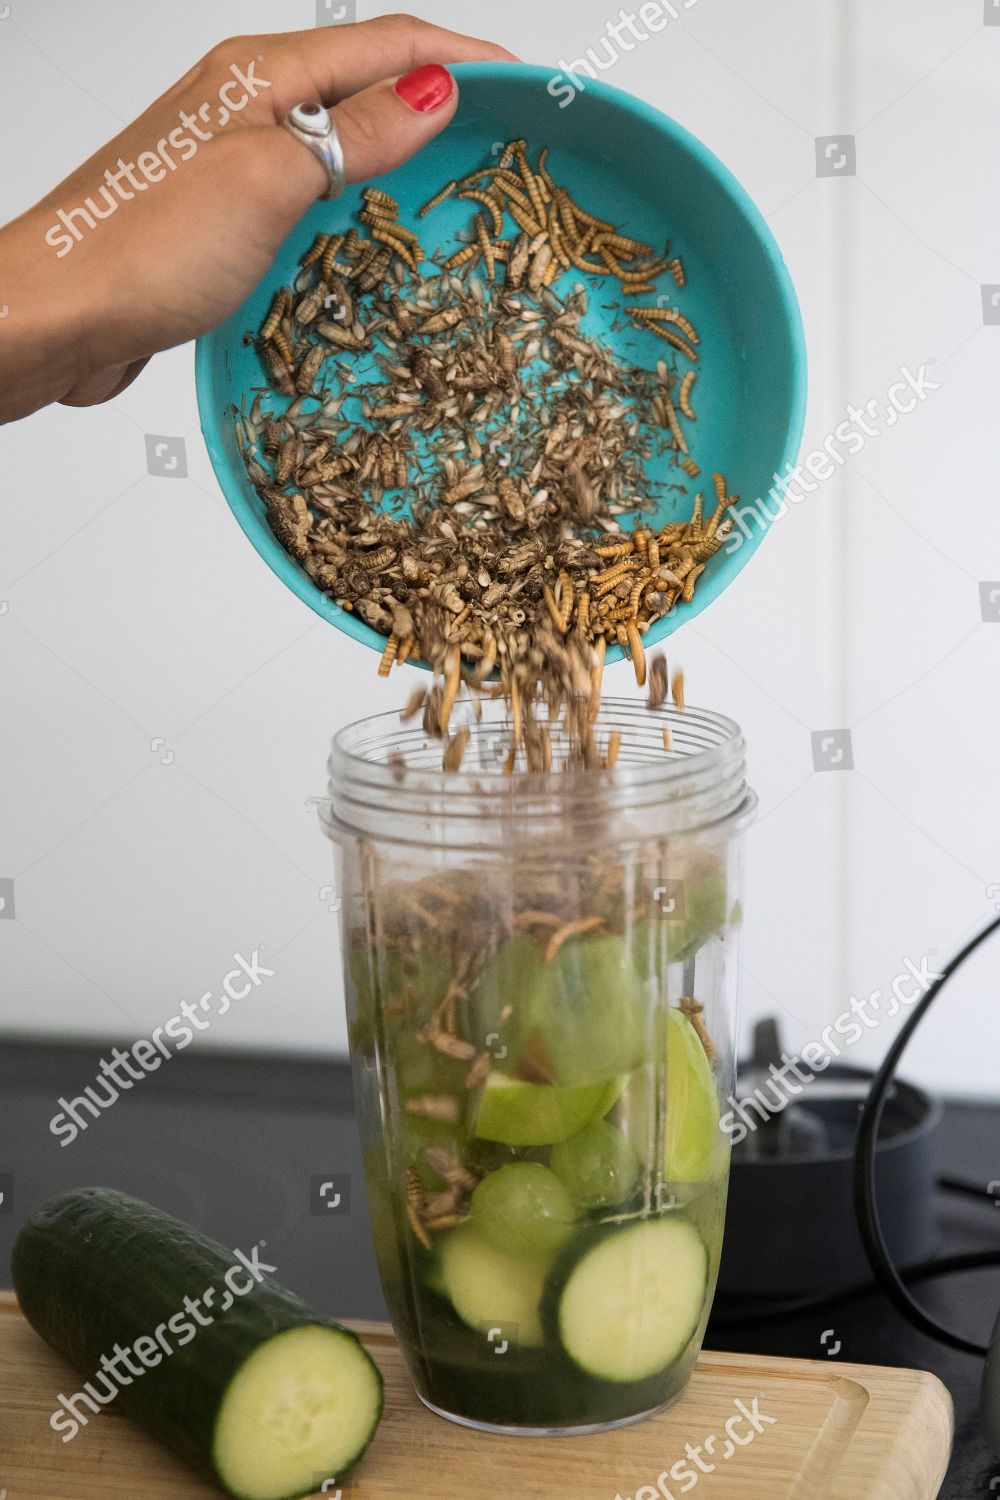 Insect Cook Andrea Staudacher Gives Mealworms Crickets Editorial Stock Photo Stock Image Shutterstock